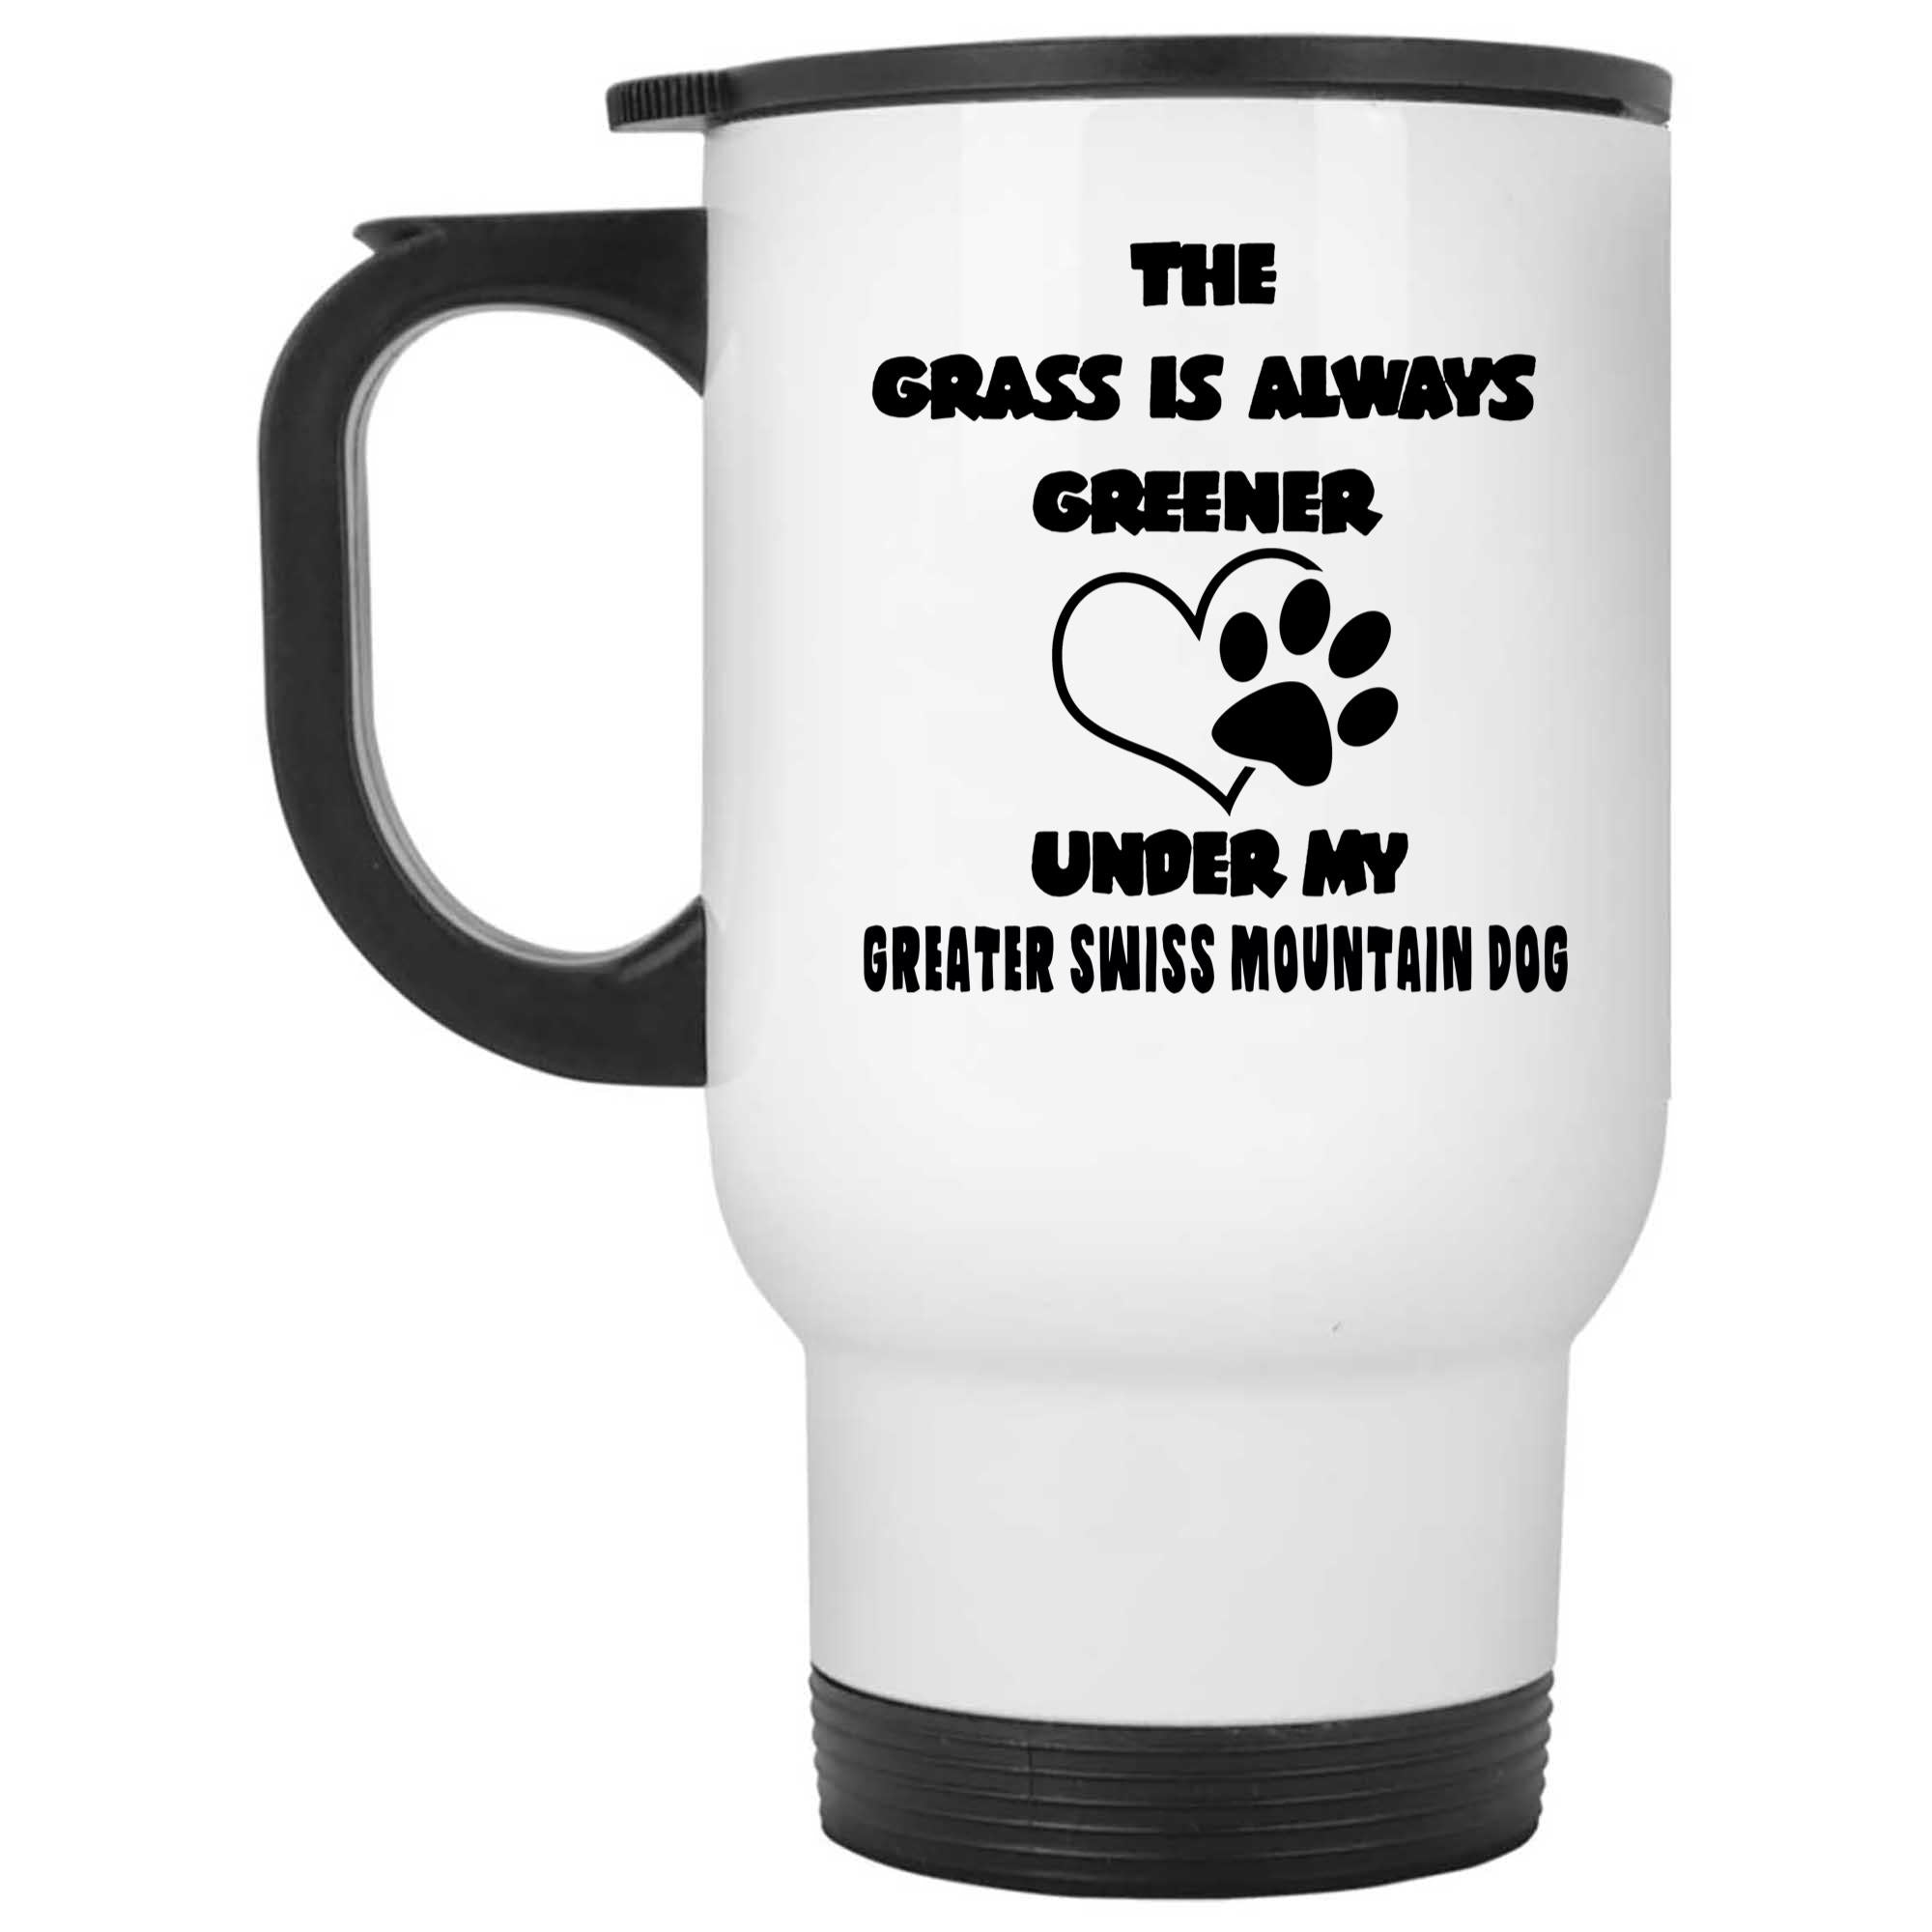 Skitons Funny Ceramic Novelty Coffee Mug The Grass Is Always Greener Under My Greater Swiss Mountain Dog Dog Funny Sarcastic, Dog Lover v7P5OPY